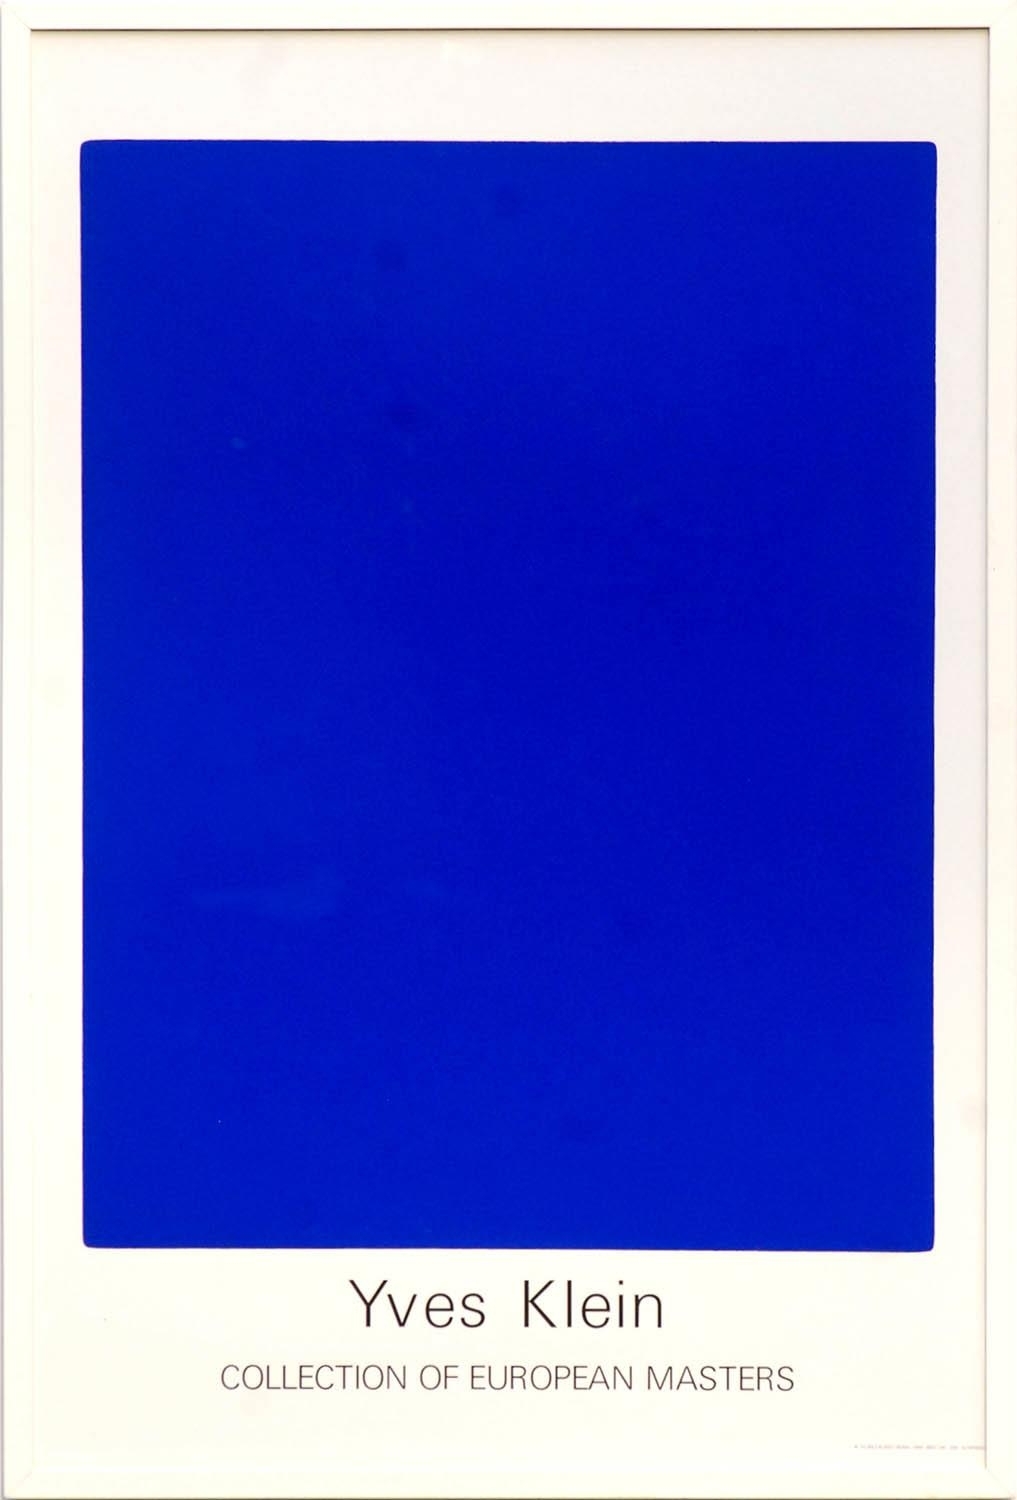 Artwork by Yves Klein, 'Blue', Made of poster